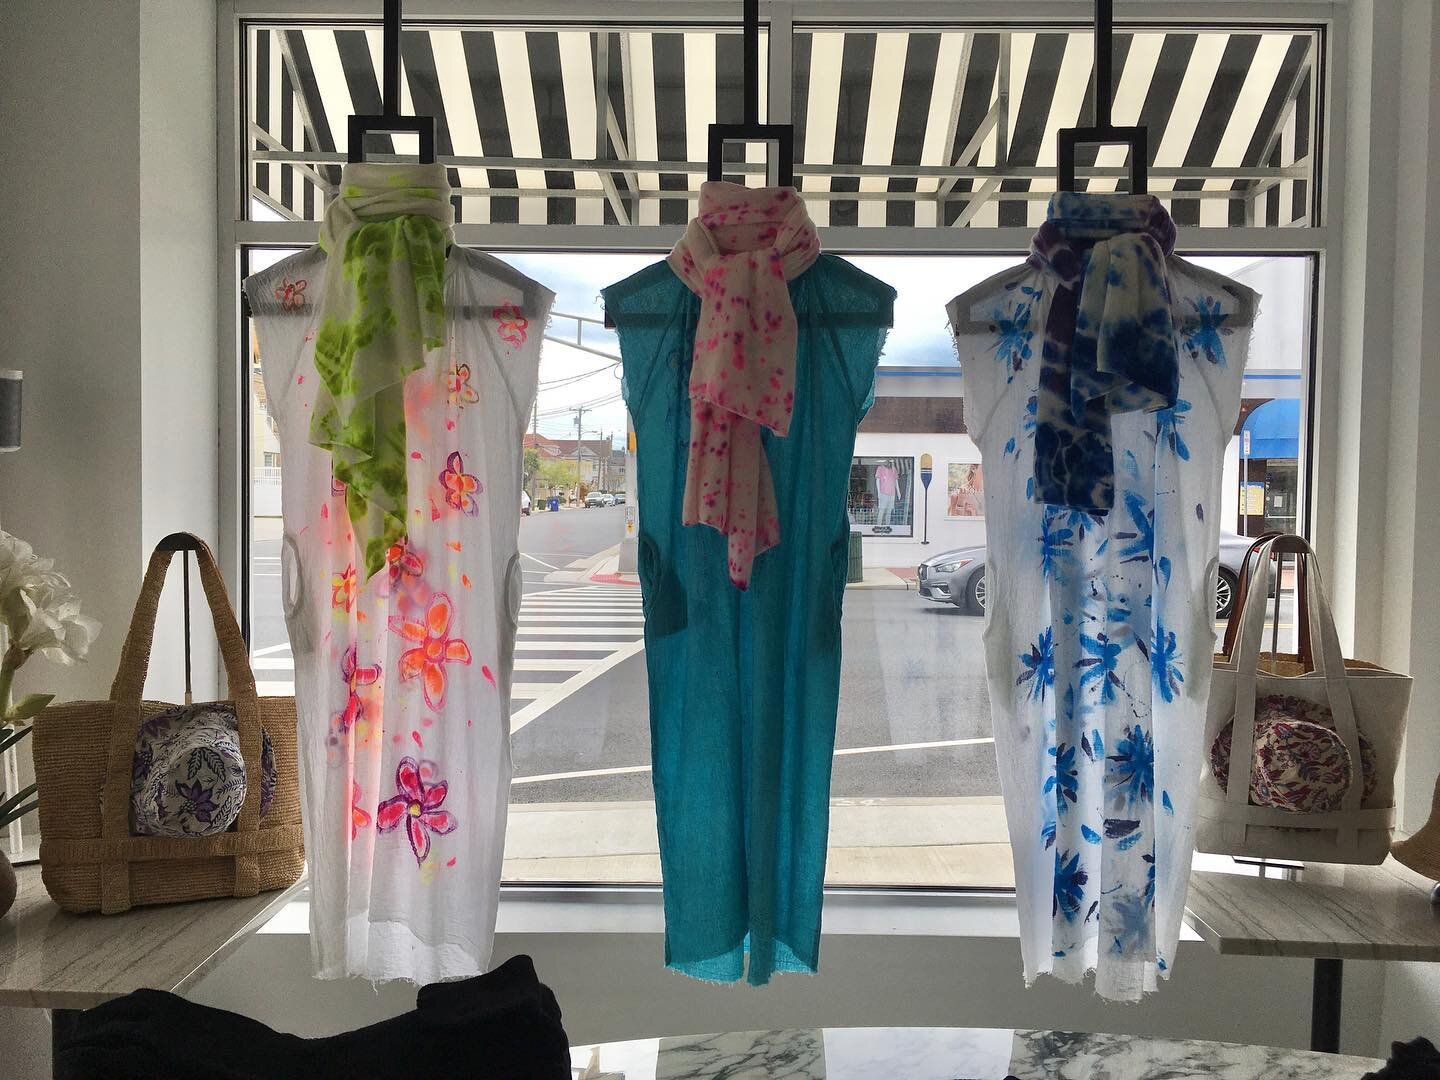 Beach vibes are our fave vibes 🌊 Airy @lovetanjane dresses for $325&ndash;$334 and scarves for $400 #knitwit #lovetanjane #boutique #fashiondaily #obsessed